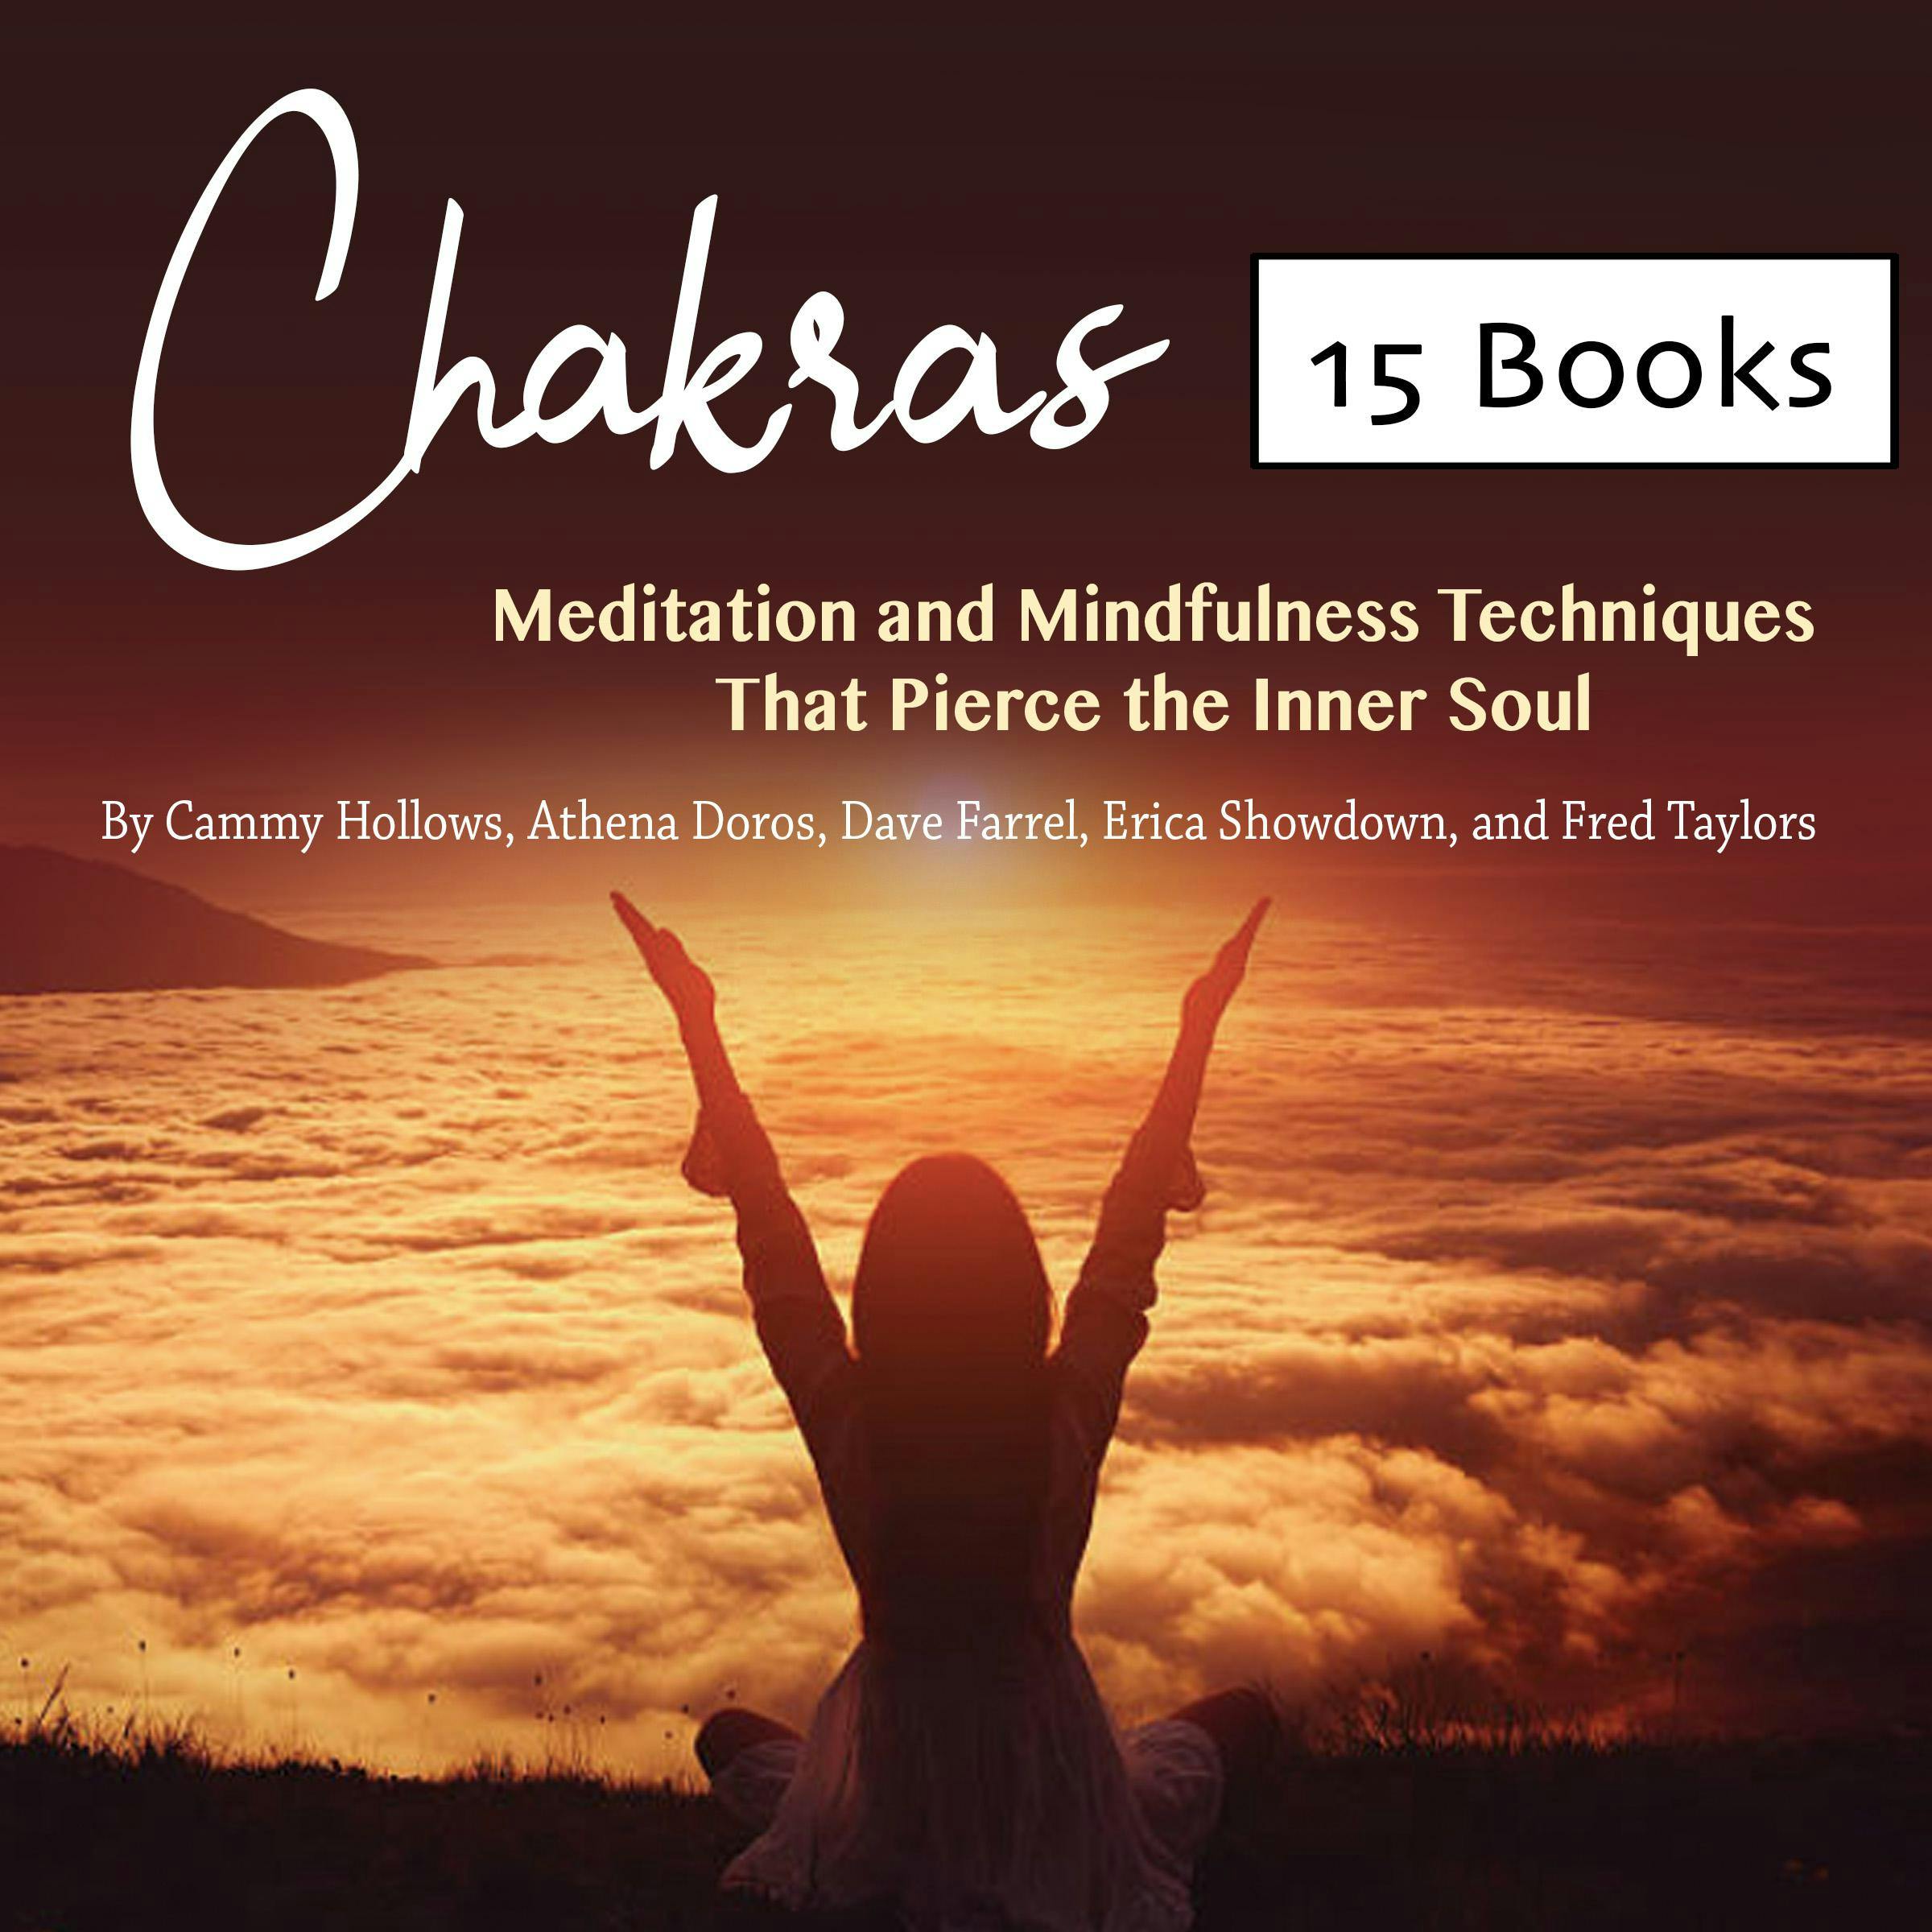 Chakras: Meditation and Mindfulness Techniques That Pierce the Inner Soul - Athena Doros, Cammy Hollows, Fred Taylors, Erica Showdown, Dave Farrel